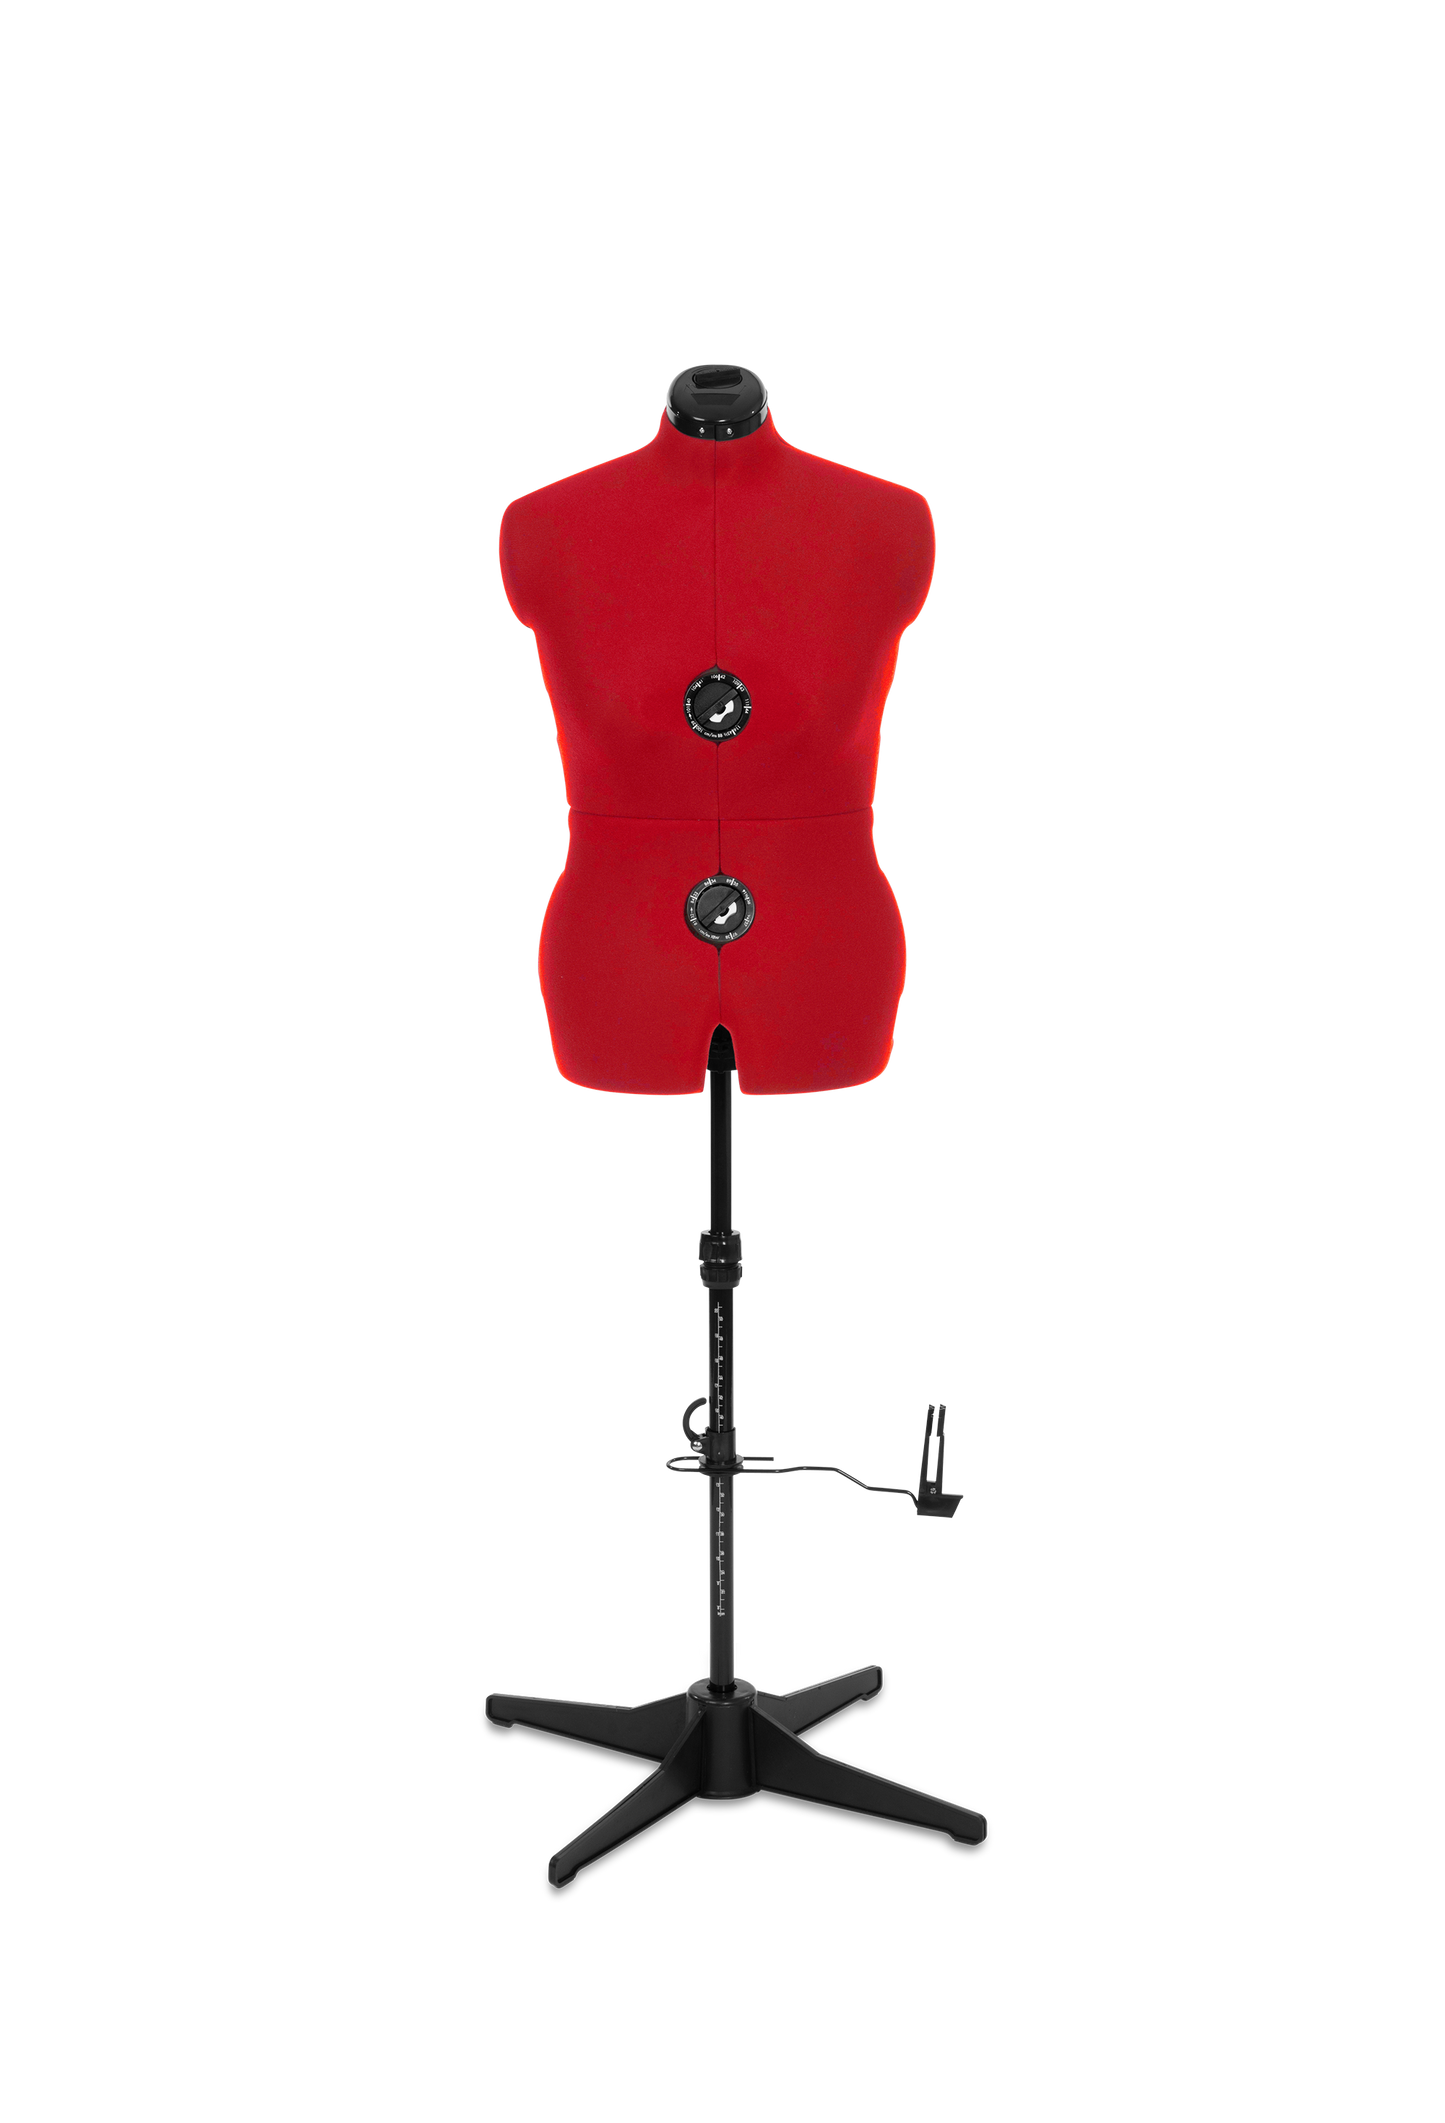 Adjustoform Tailormaid Deluxe Adjustable Dress Form with Accessory Set - Sewing Mannequin - Built in pin grip and hem marker